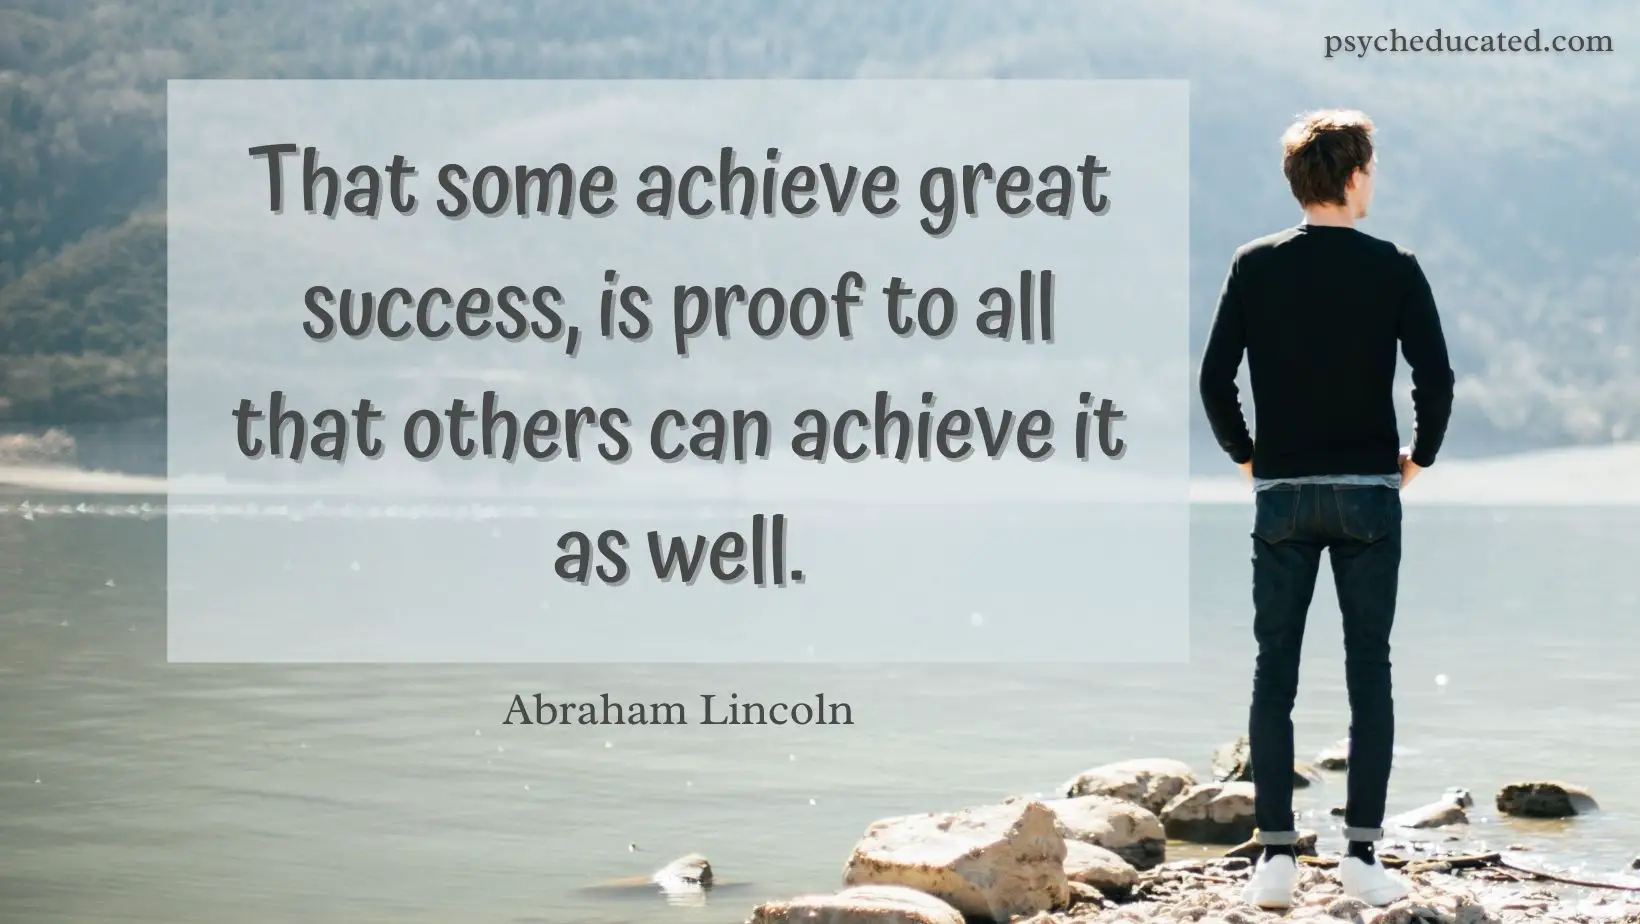 Inspirational Quotes About Achieving Goals